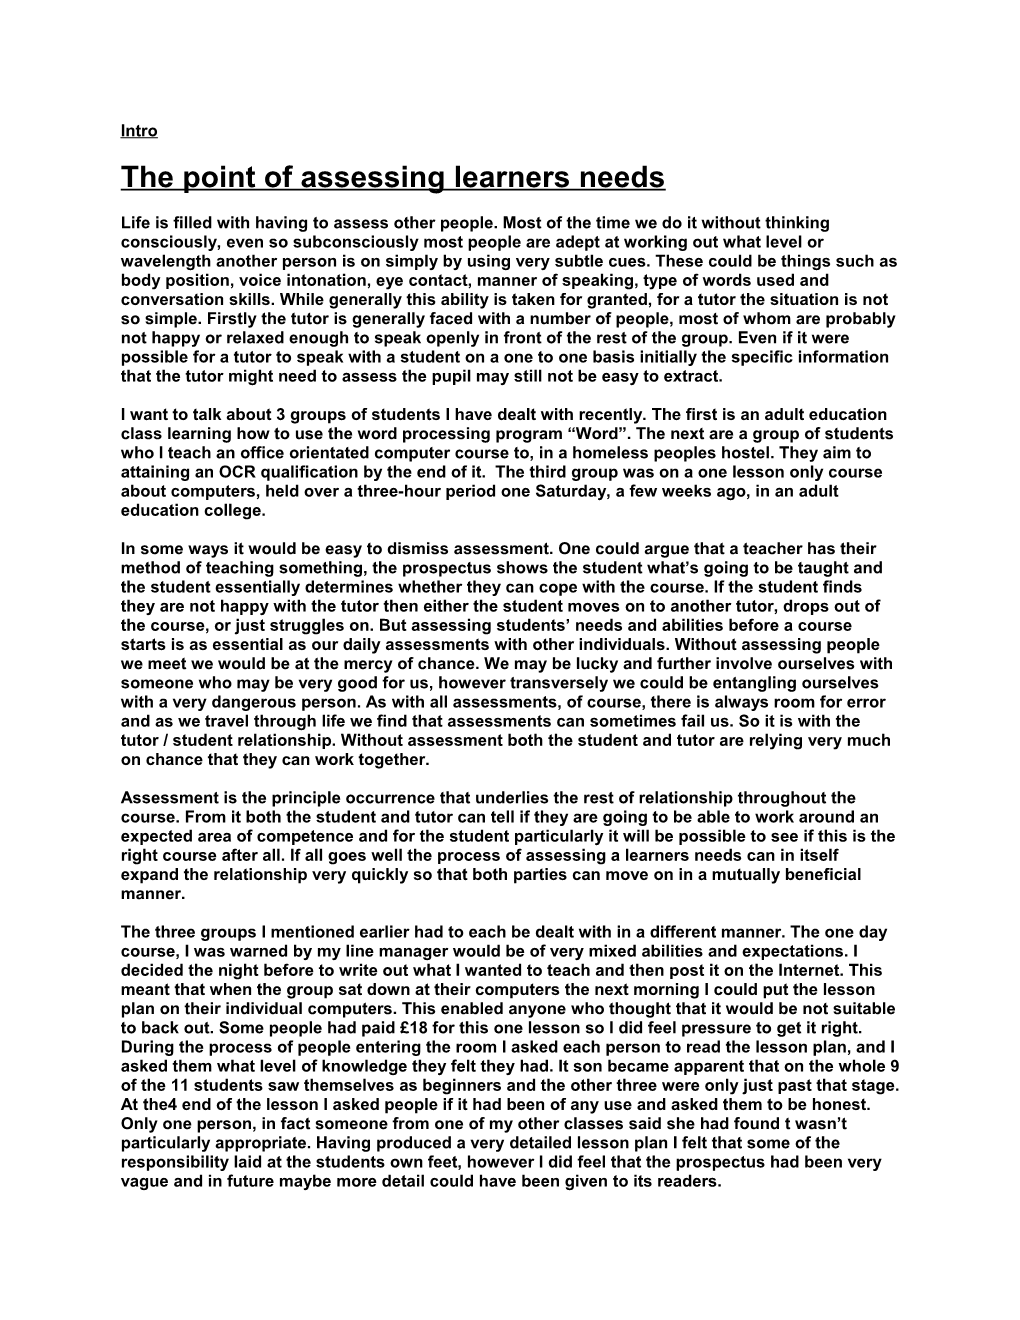 The Point of Assessing Learners Needs